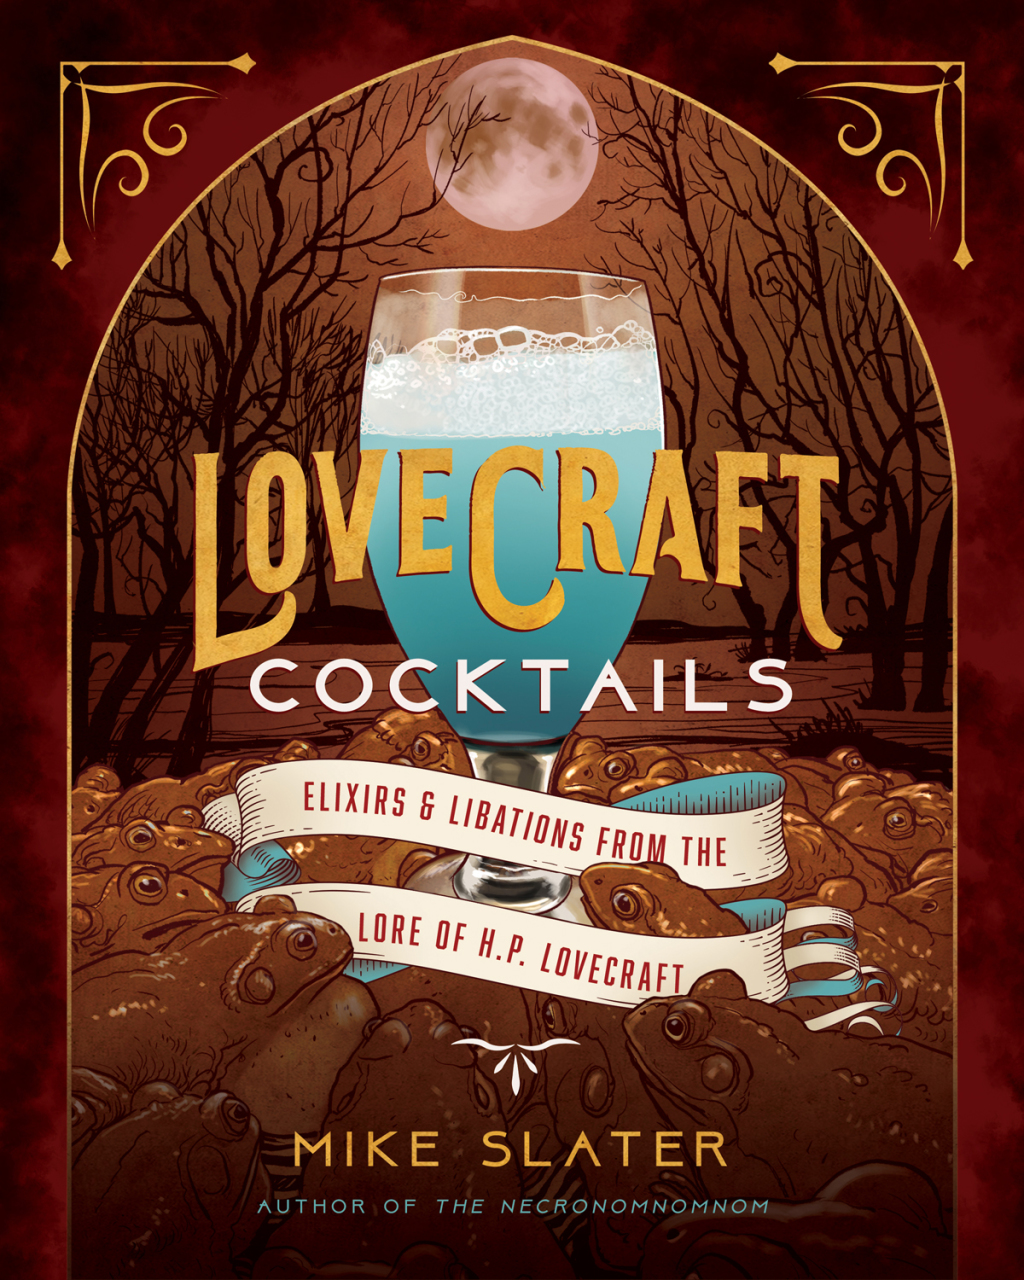 ISBN 9781682686423 product image for Lovecraft Cocktails: Elixirs & Libations from the Lore of H. P. Lovecraft (eBook | upcitemdb.com